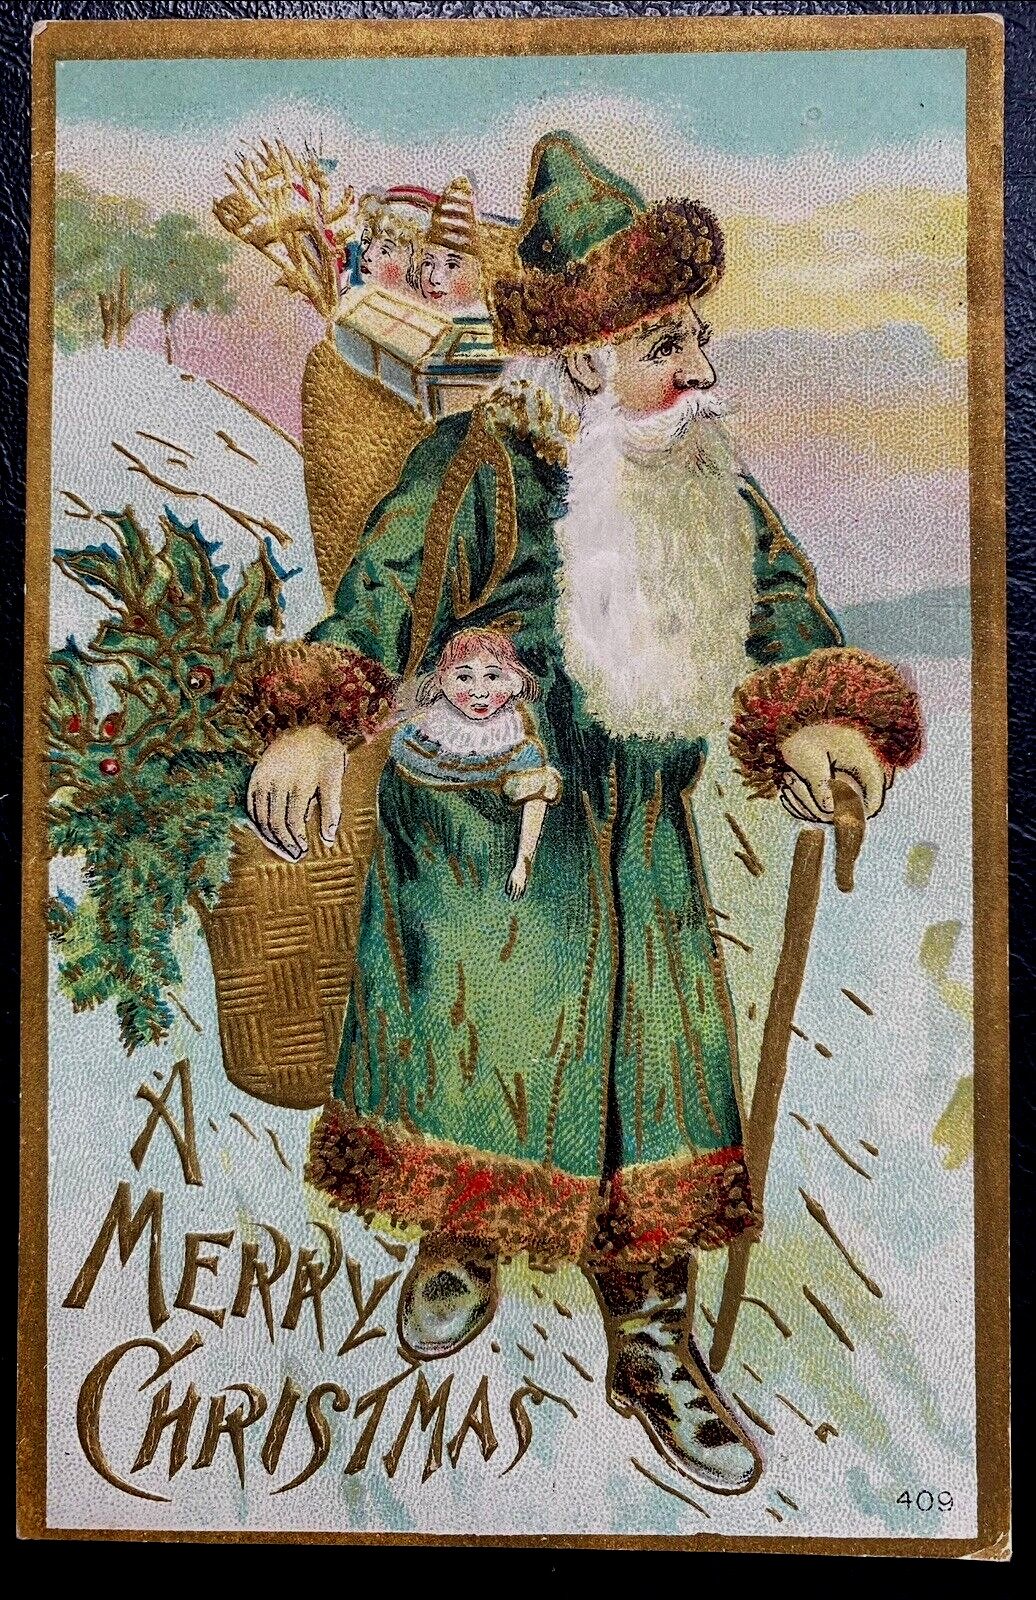 Green Robe Santa Claus in Snow~with Toys~Doll~Antique ~Christmas Postcard~k162